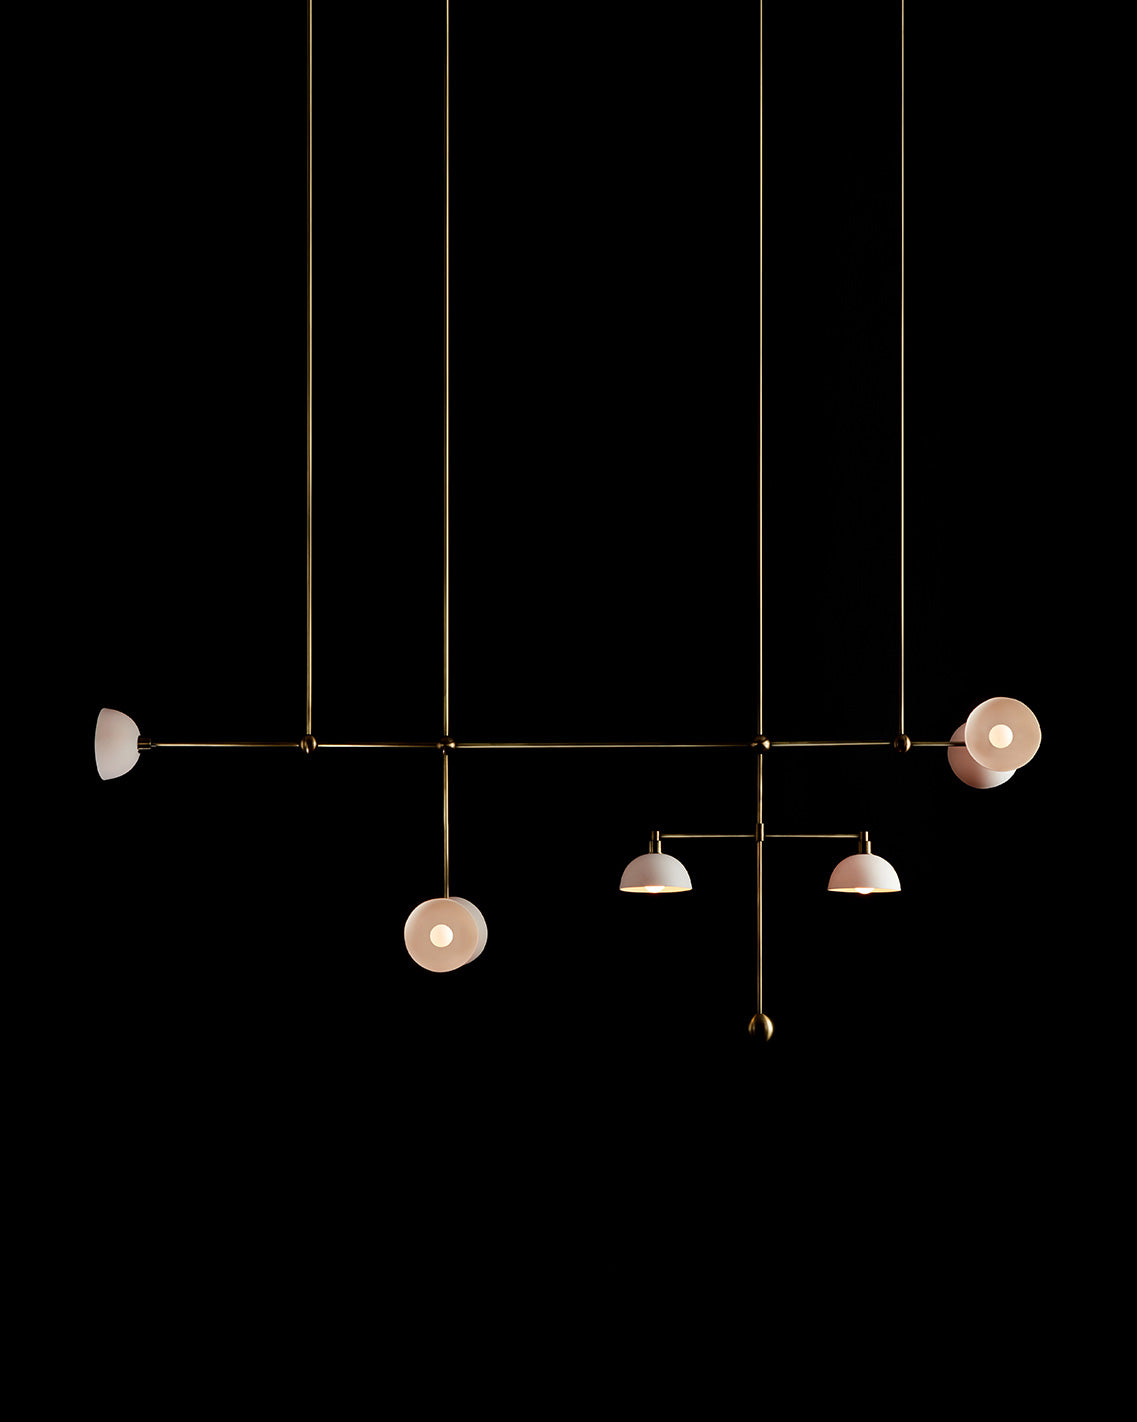 TRAPEZE : 7 MOBILE ceiling pendant in Aged Brass finish with Porcelain bowls, hanging against a black background. 